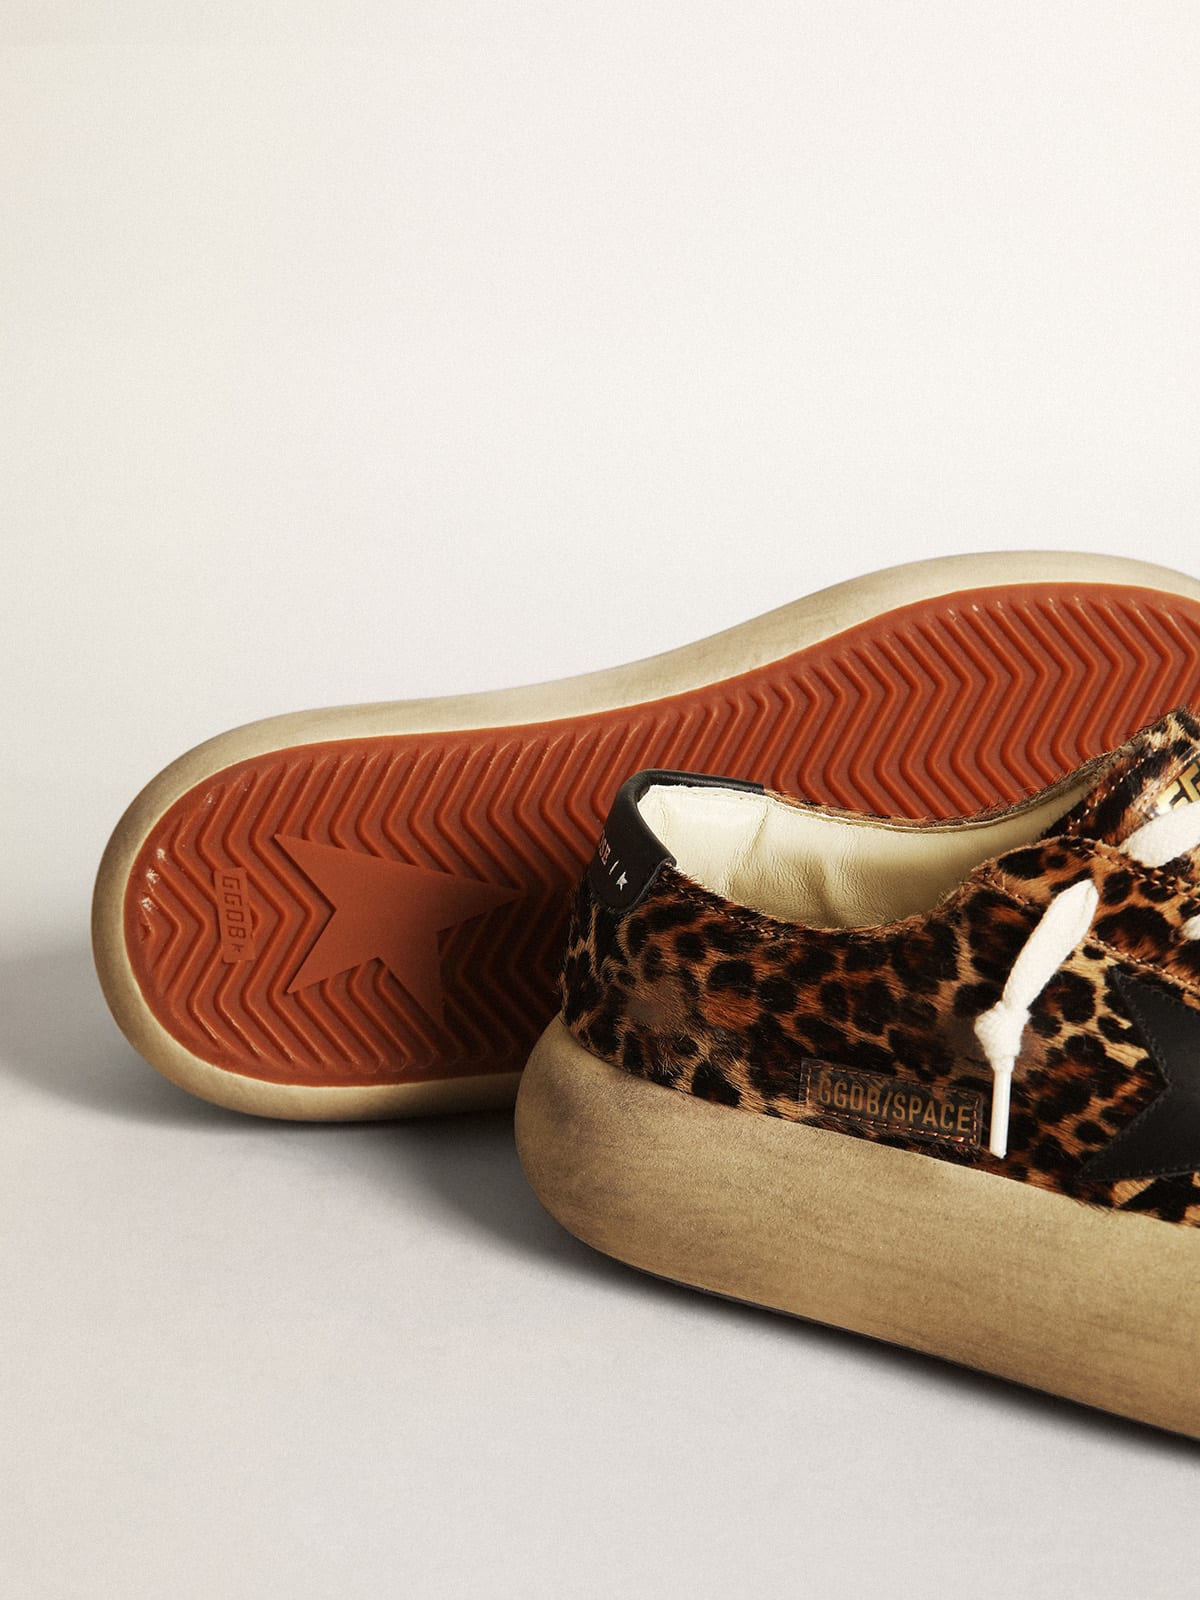 Golden Goose - Women's Space-Star shoes in leopard-print pony skin with black leather star and heel tab in 